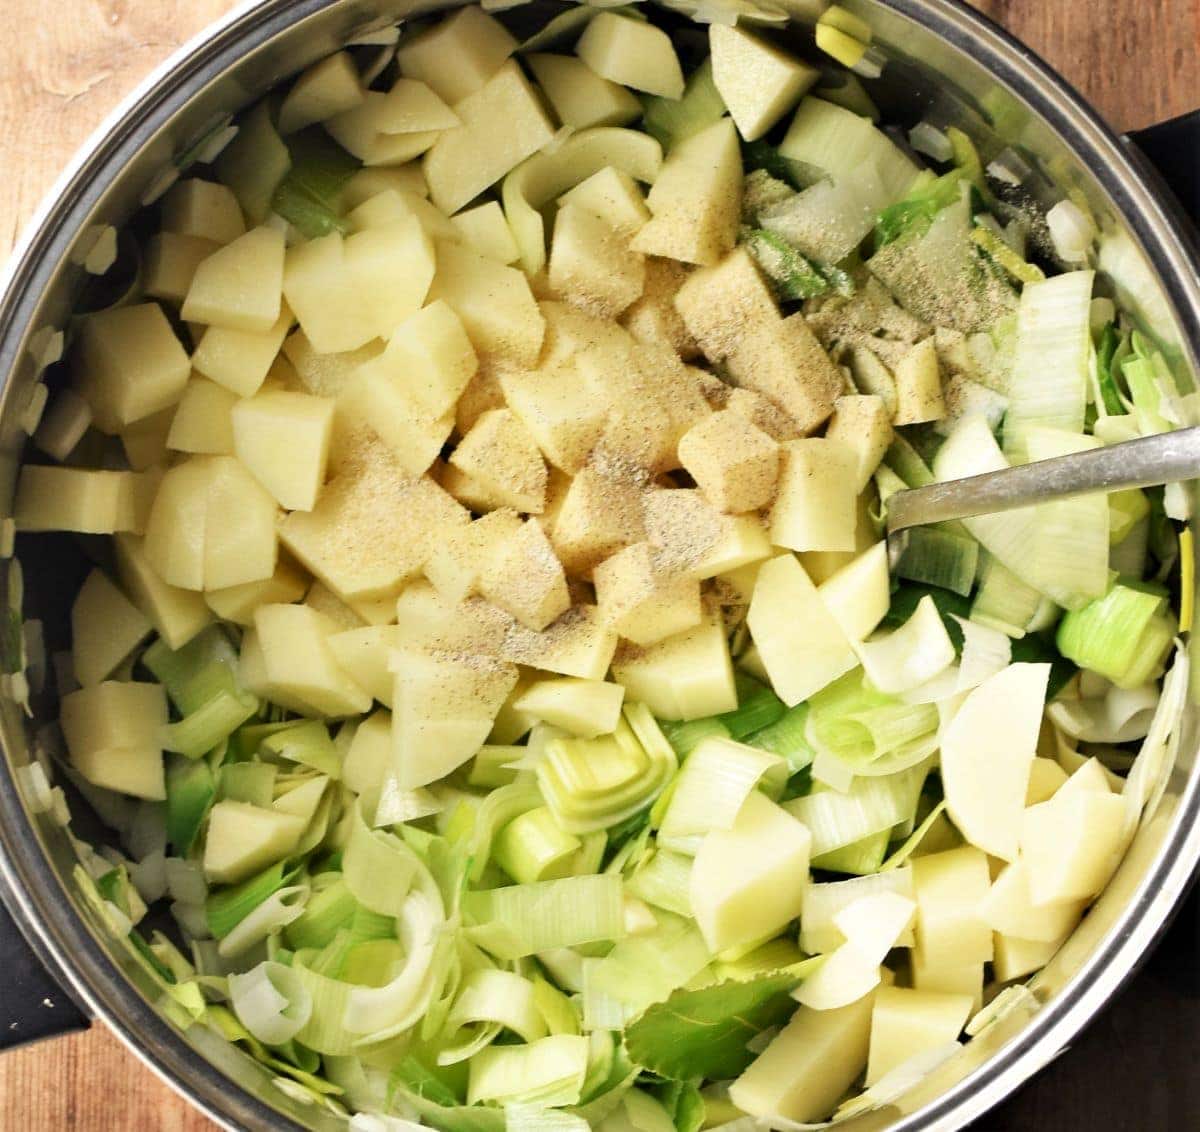 Diced potatoes and chopped leeks in large pot with spoon.